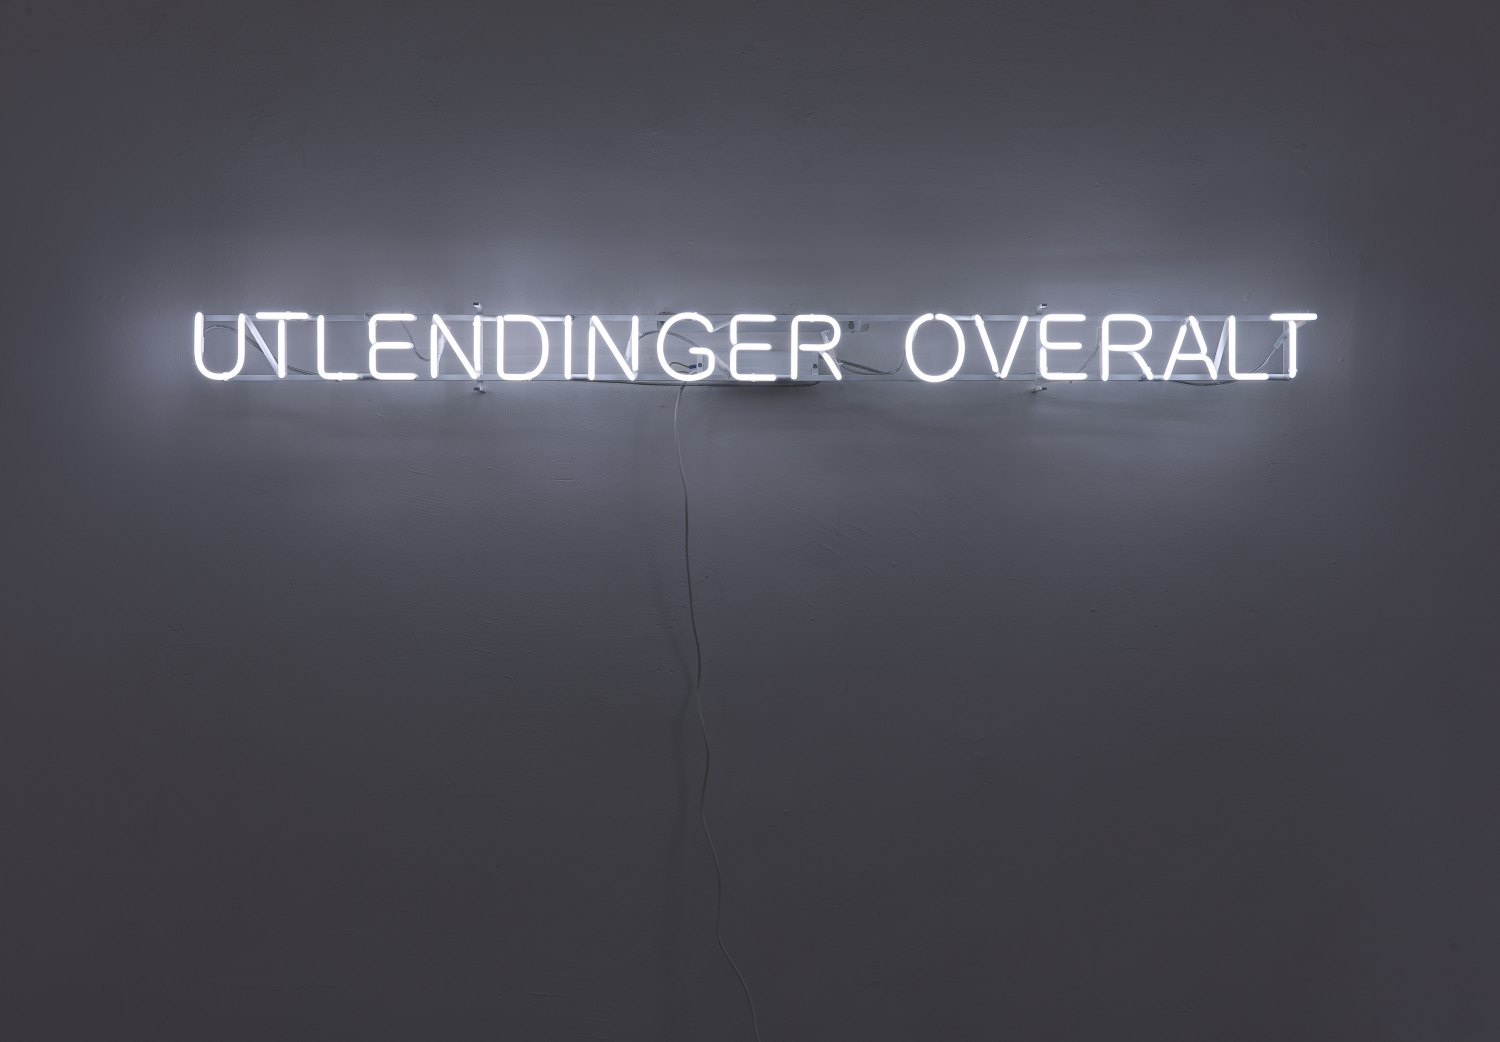 Claire Fontaine Foreigners everywhere (Norwegian), 2007 Suspended, wall or window mounted neon, framework, electronic transformer, cables, 9.8 × 163 × 4.5 cm